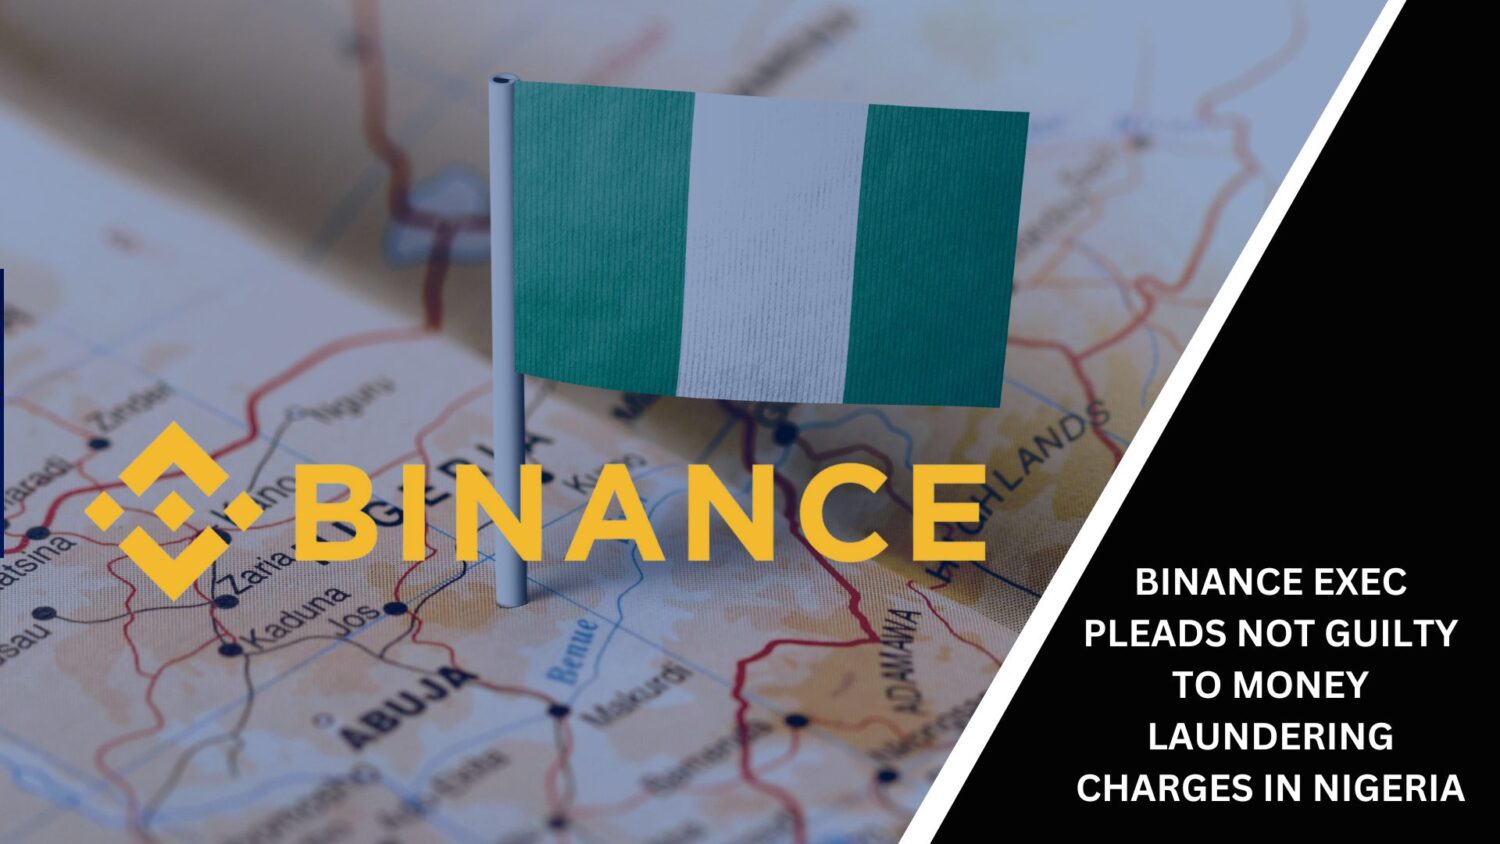 Binance Exec Pleads Not Guilty To Money Laundering Charges In Nigeria